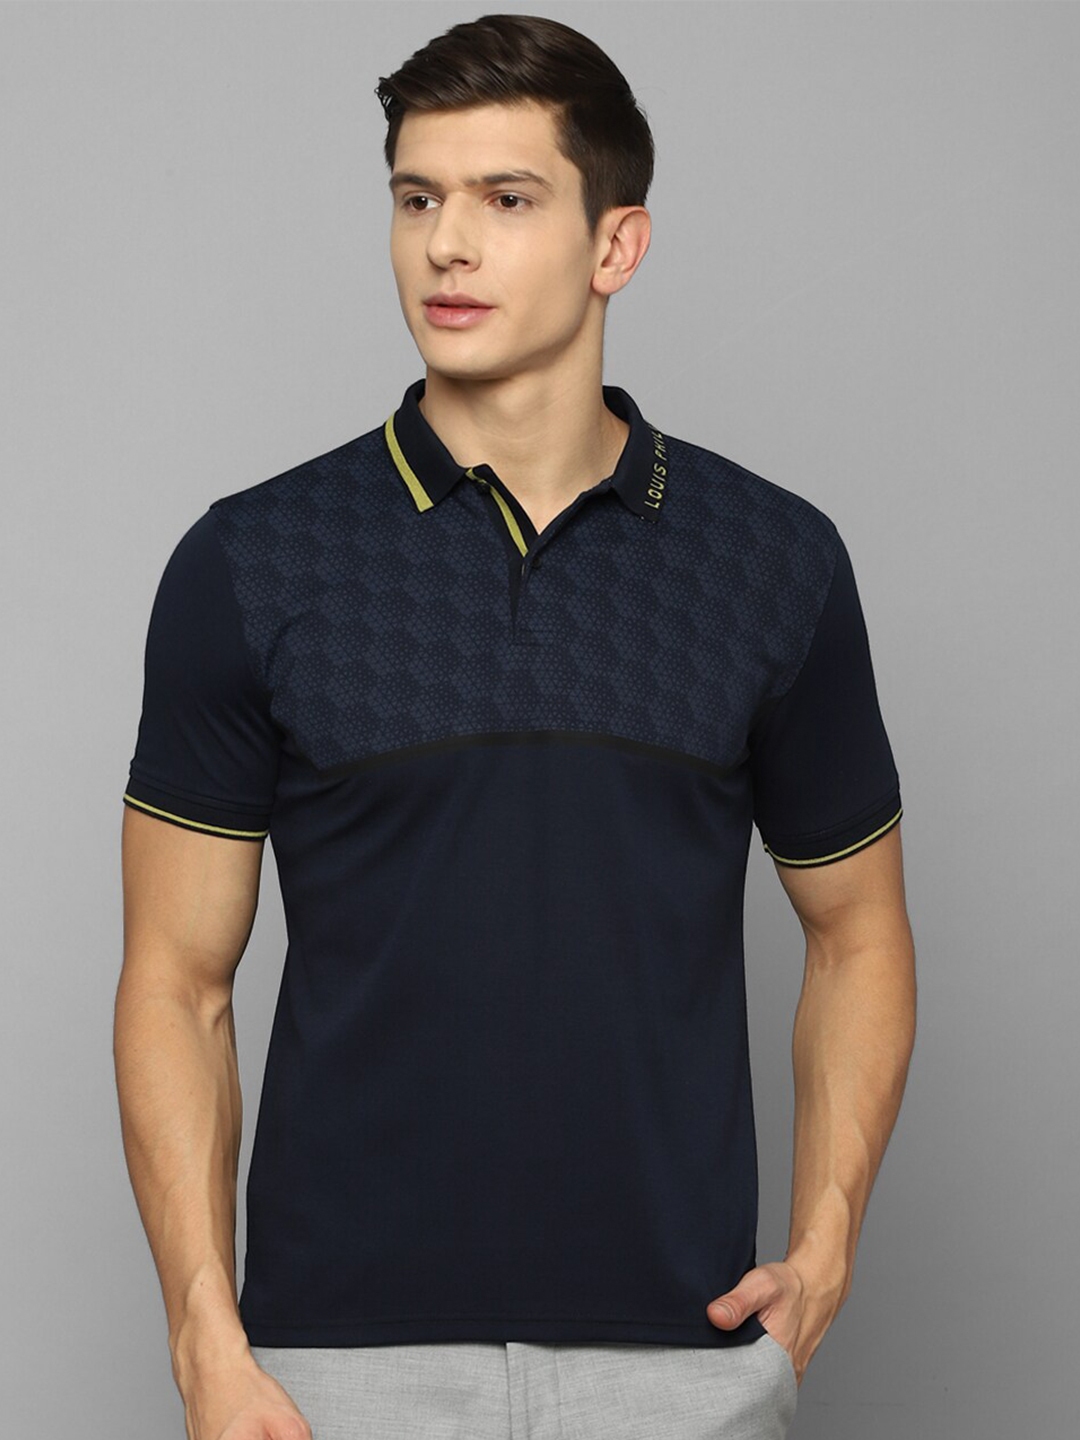 Louis Philippe Ath.Work Striped Men Polo Neck Blue T-Shirt - Buy